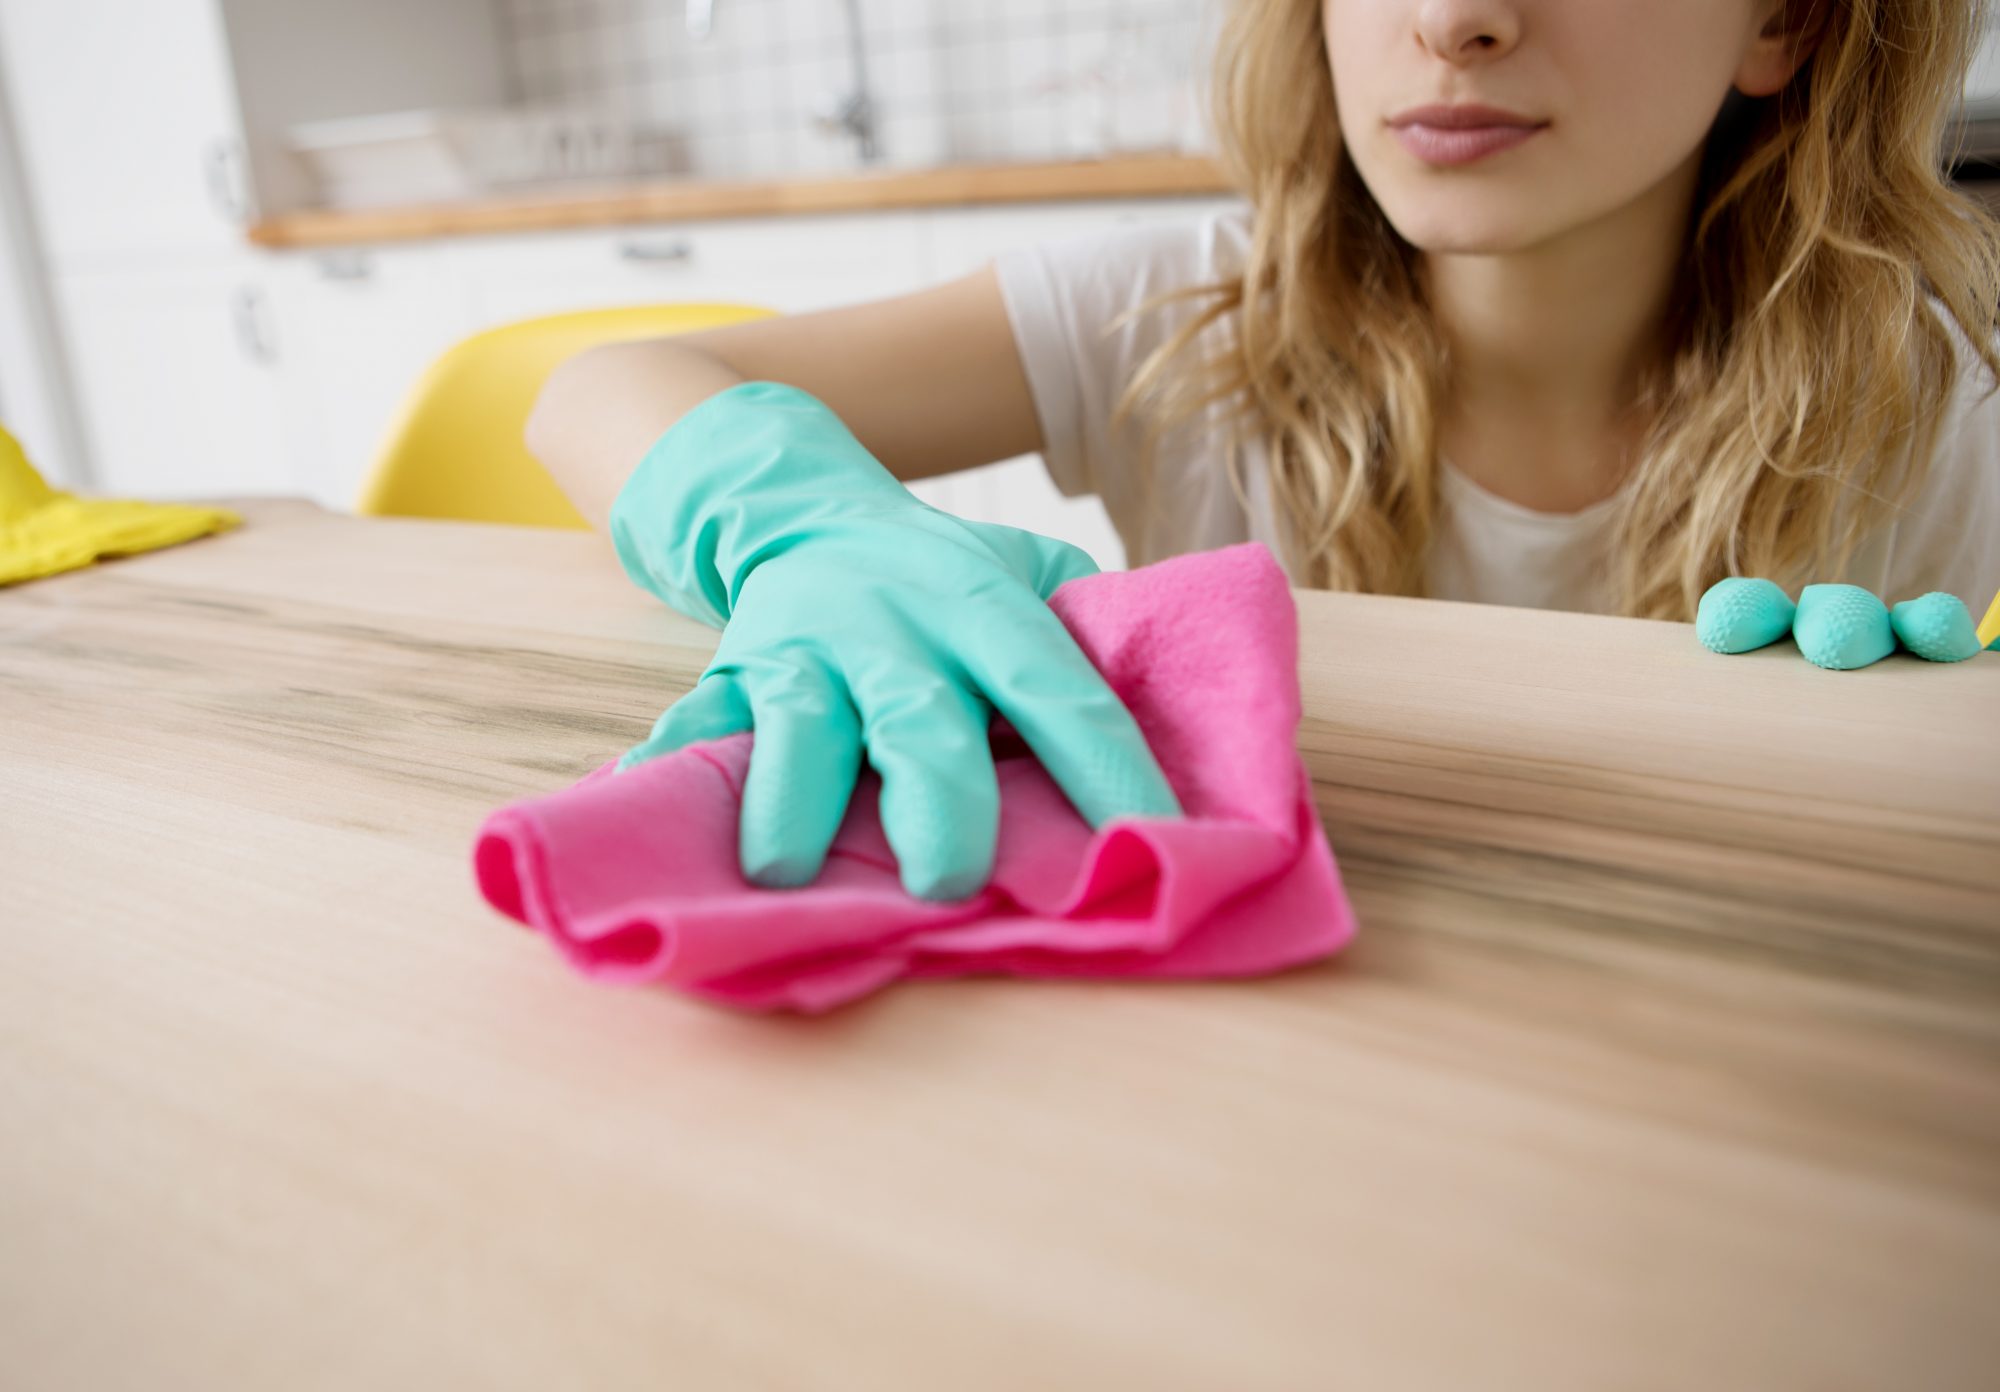 Cleaning countertops